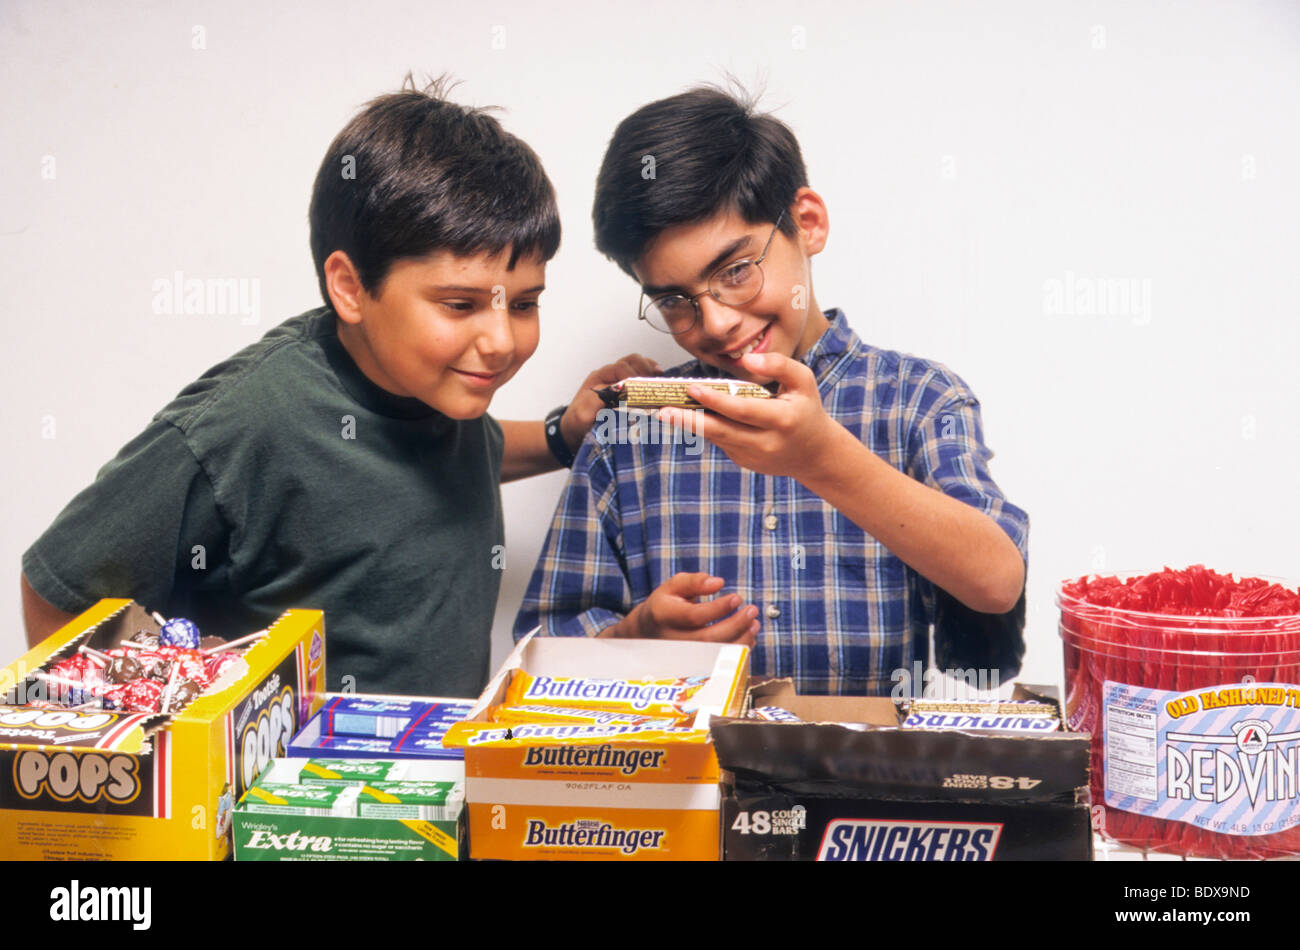 boys read nutrition information on candy bar in store Stock Photo